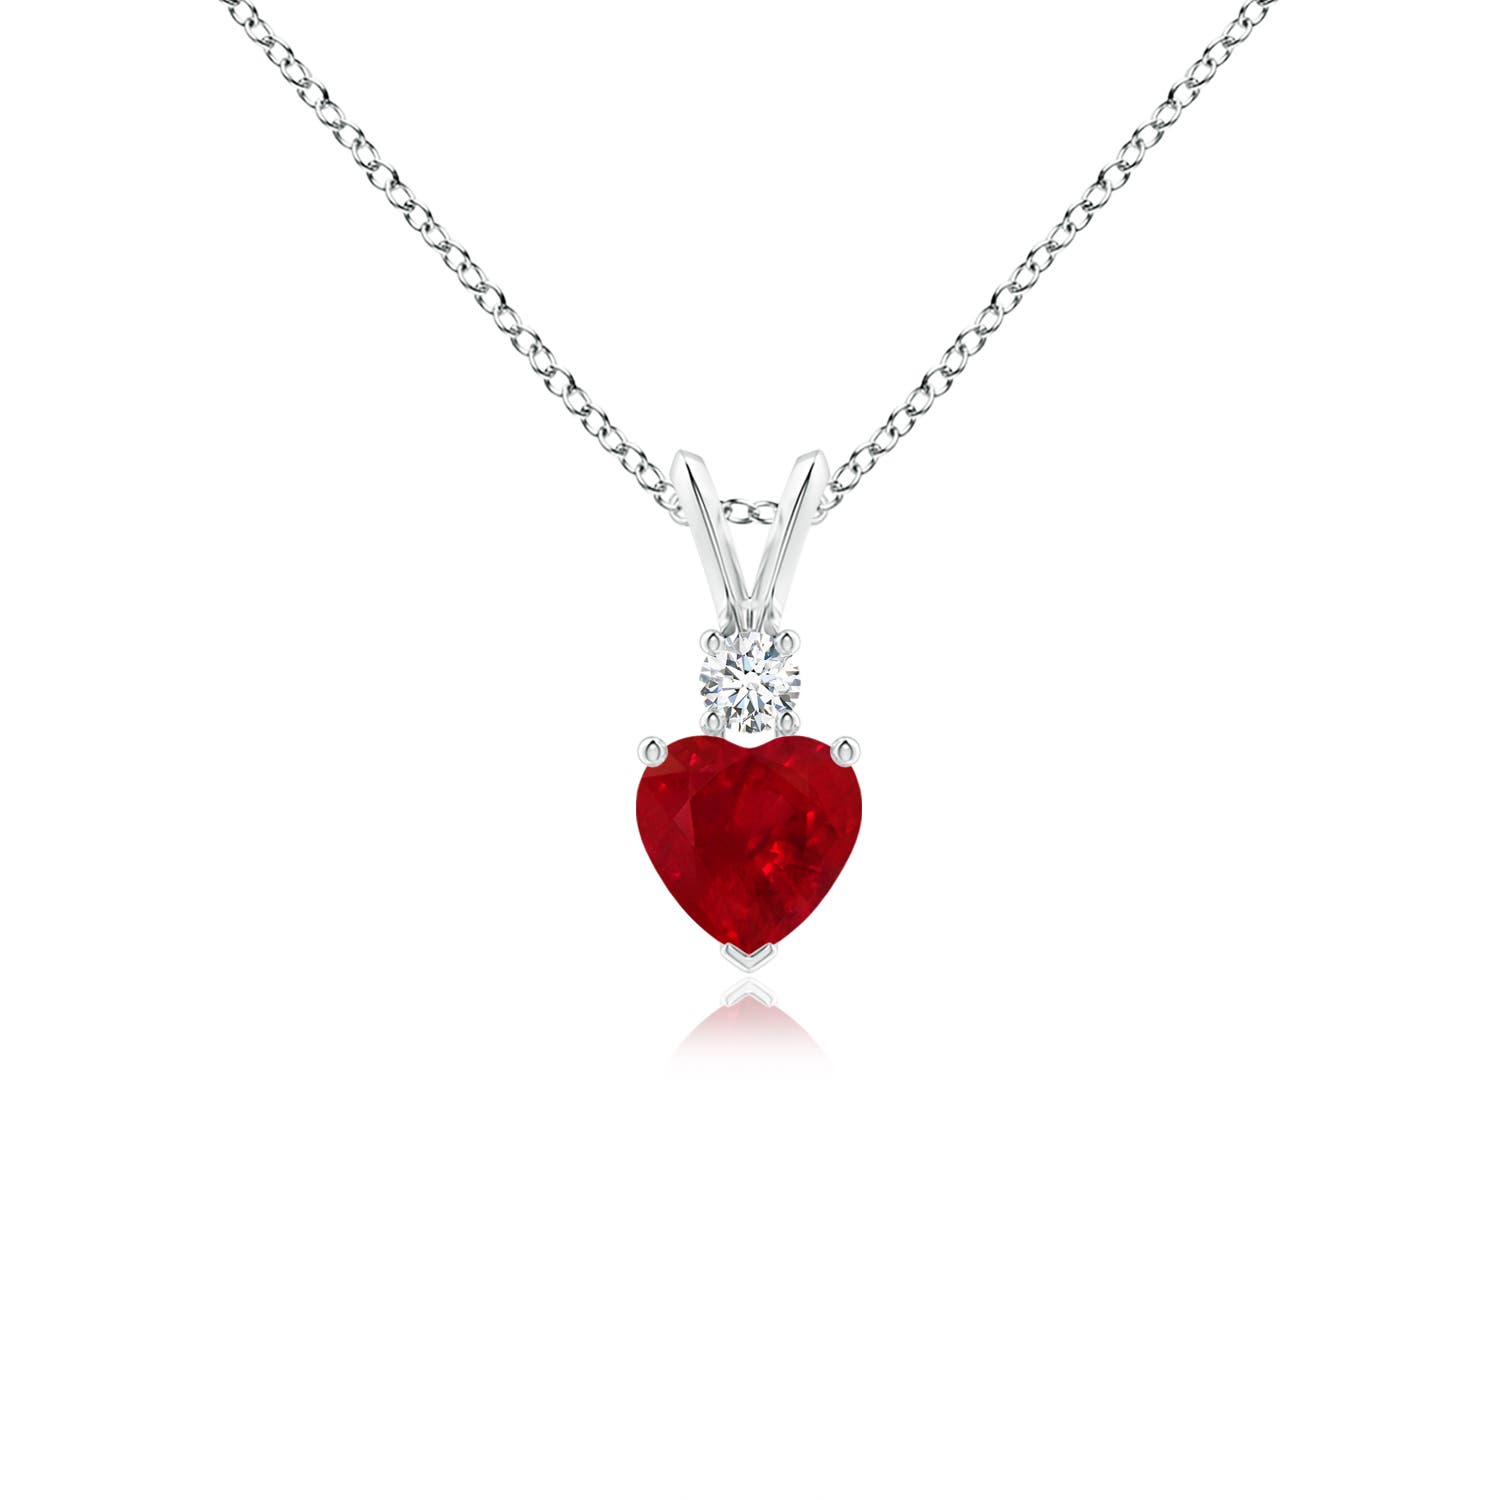 AAA - Ruby / 0.59 CT / 14 KT White Gold